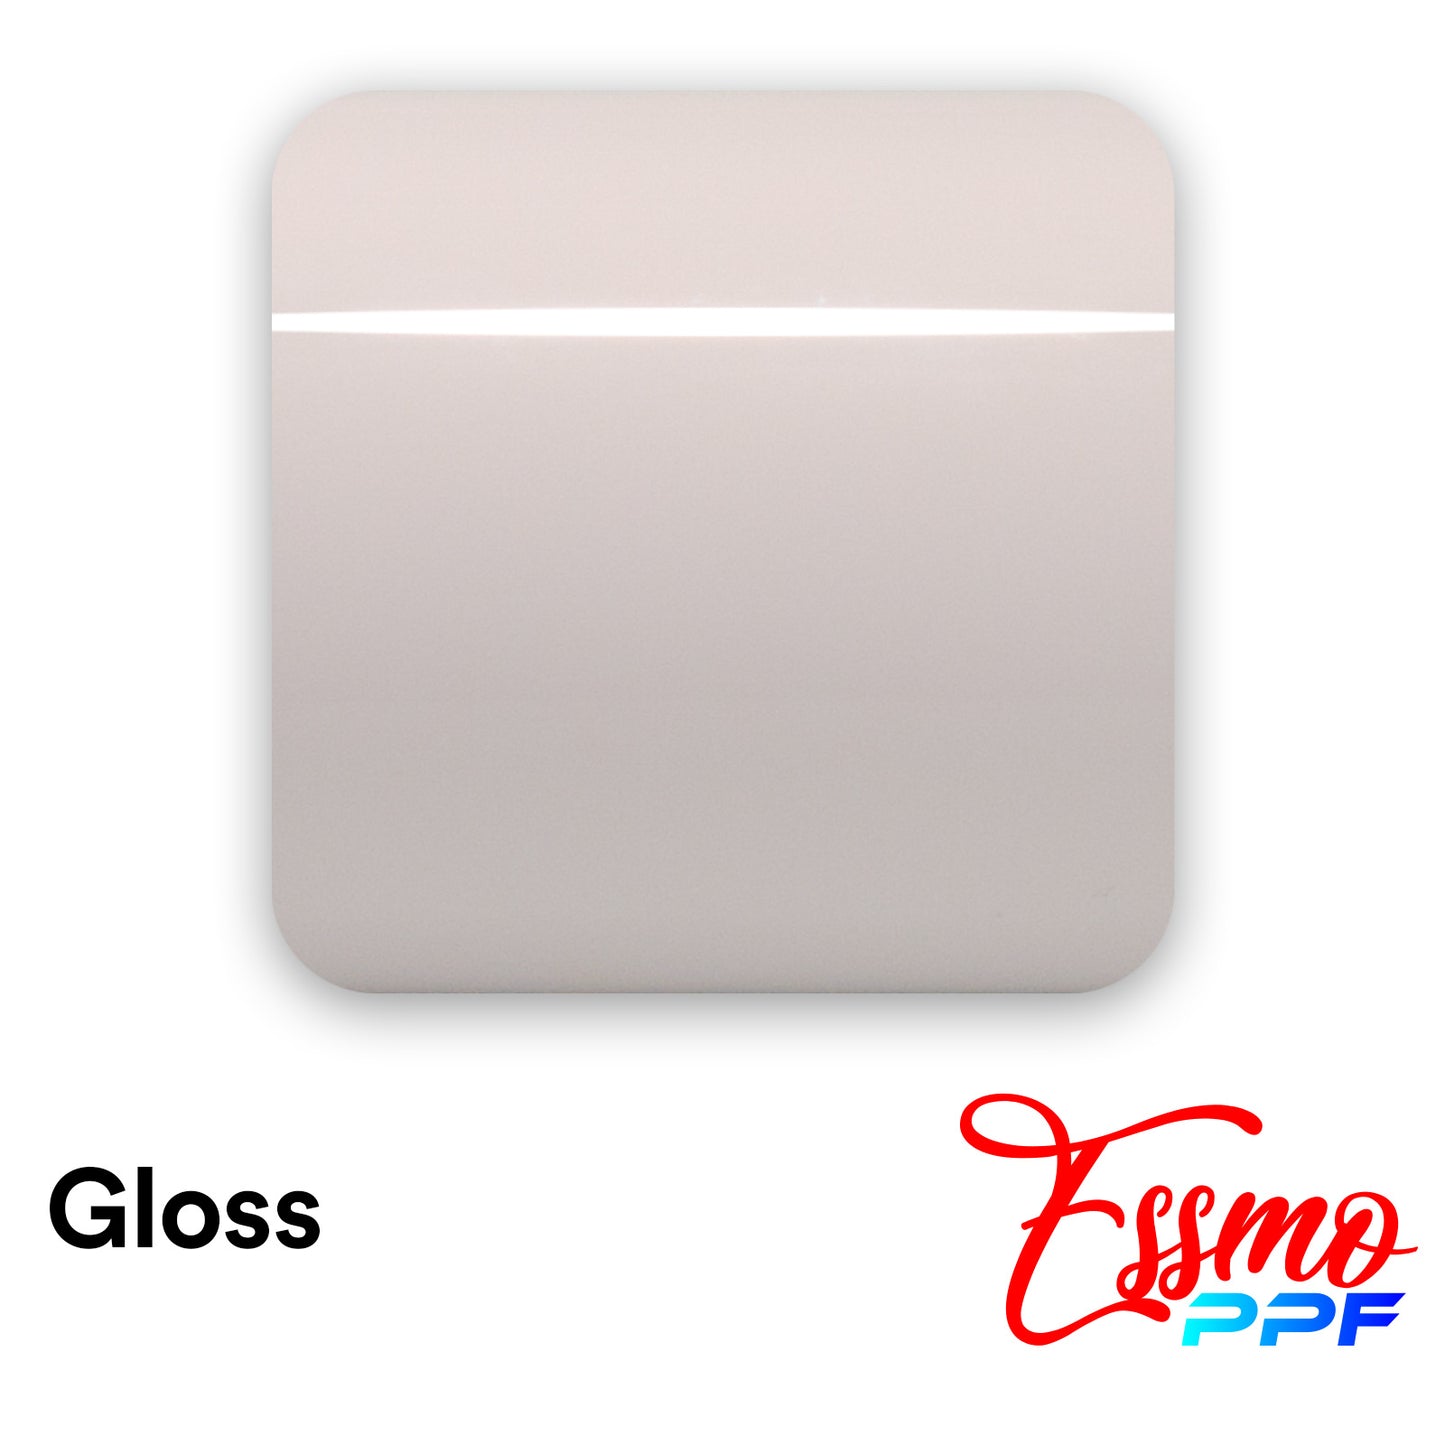 PPF Paint Protection Film TPU Gloss Blush Pink Full Roll Special Order